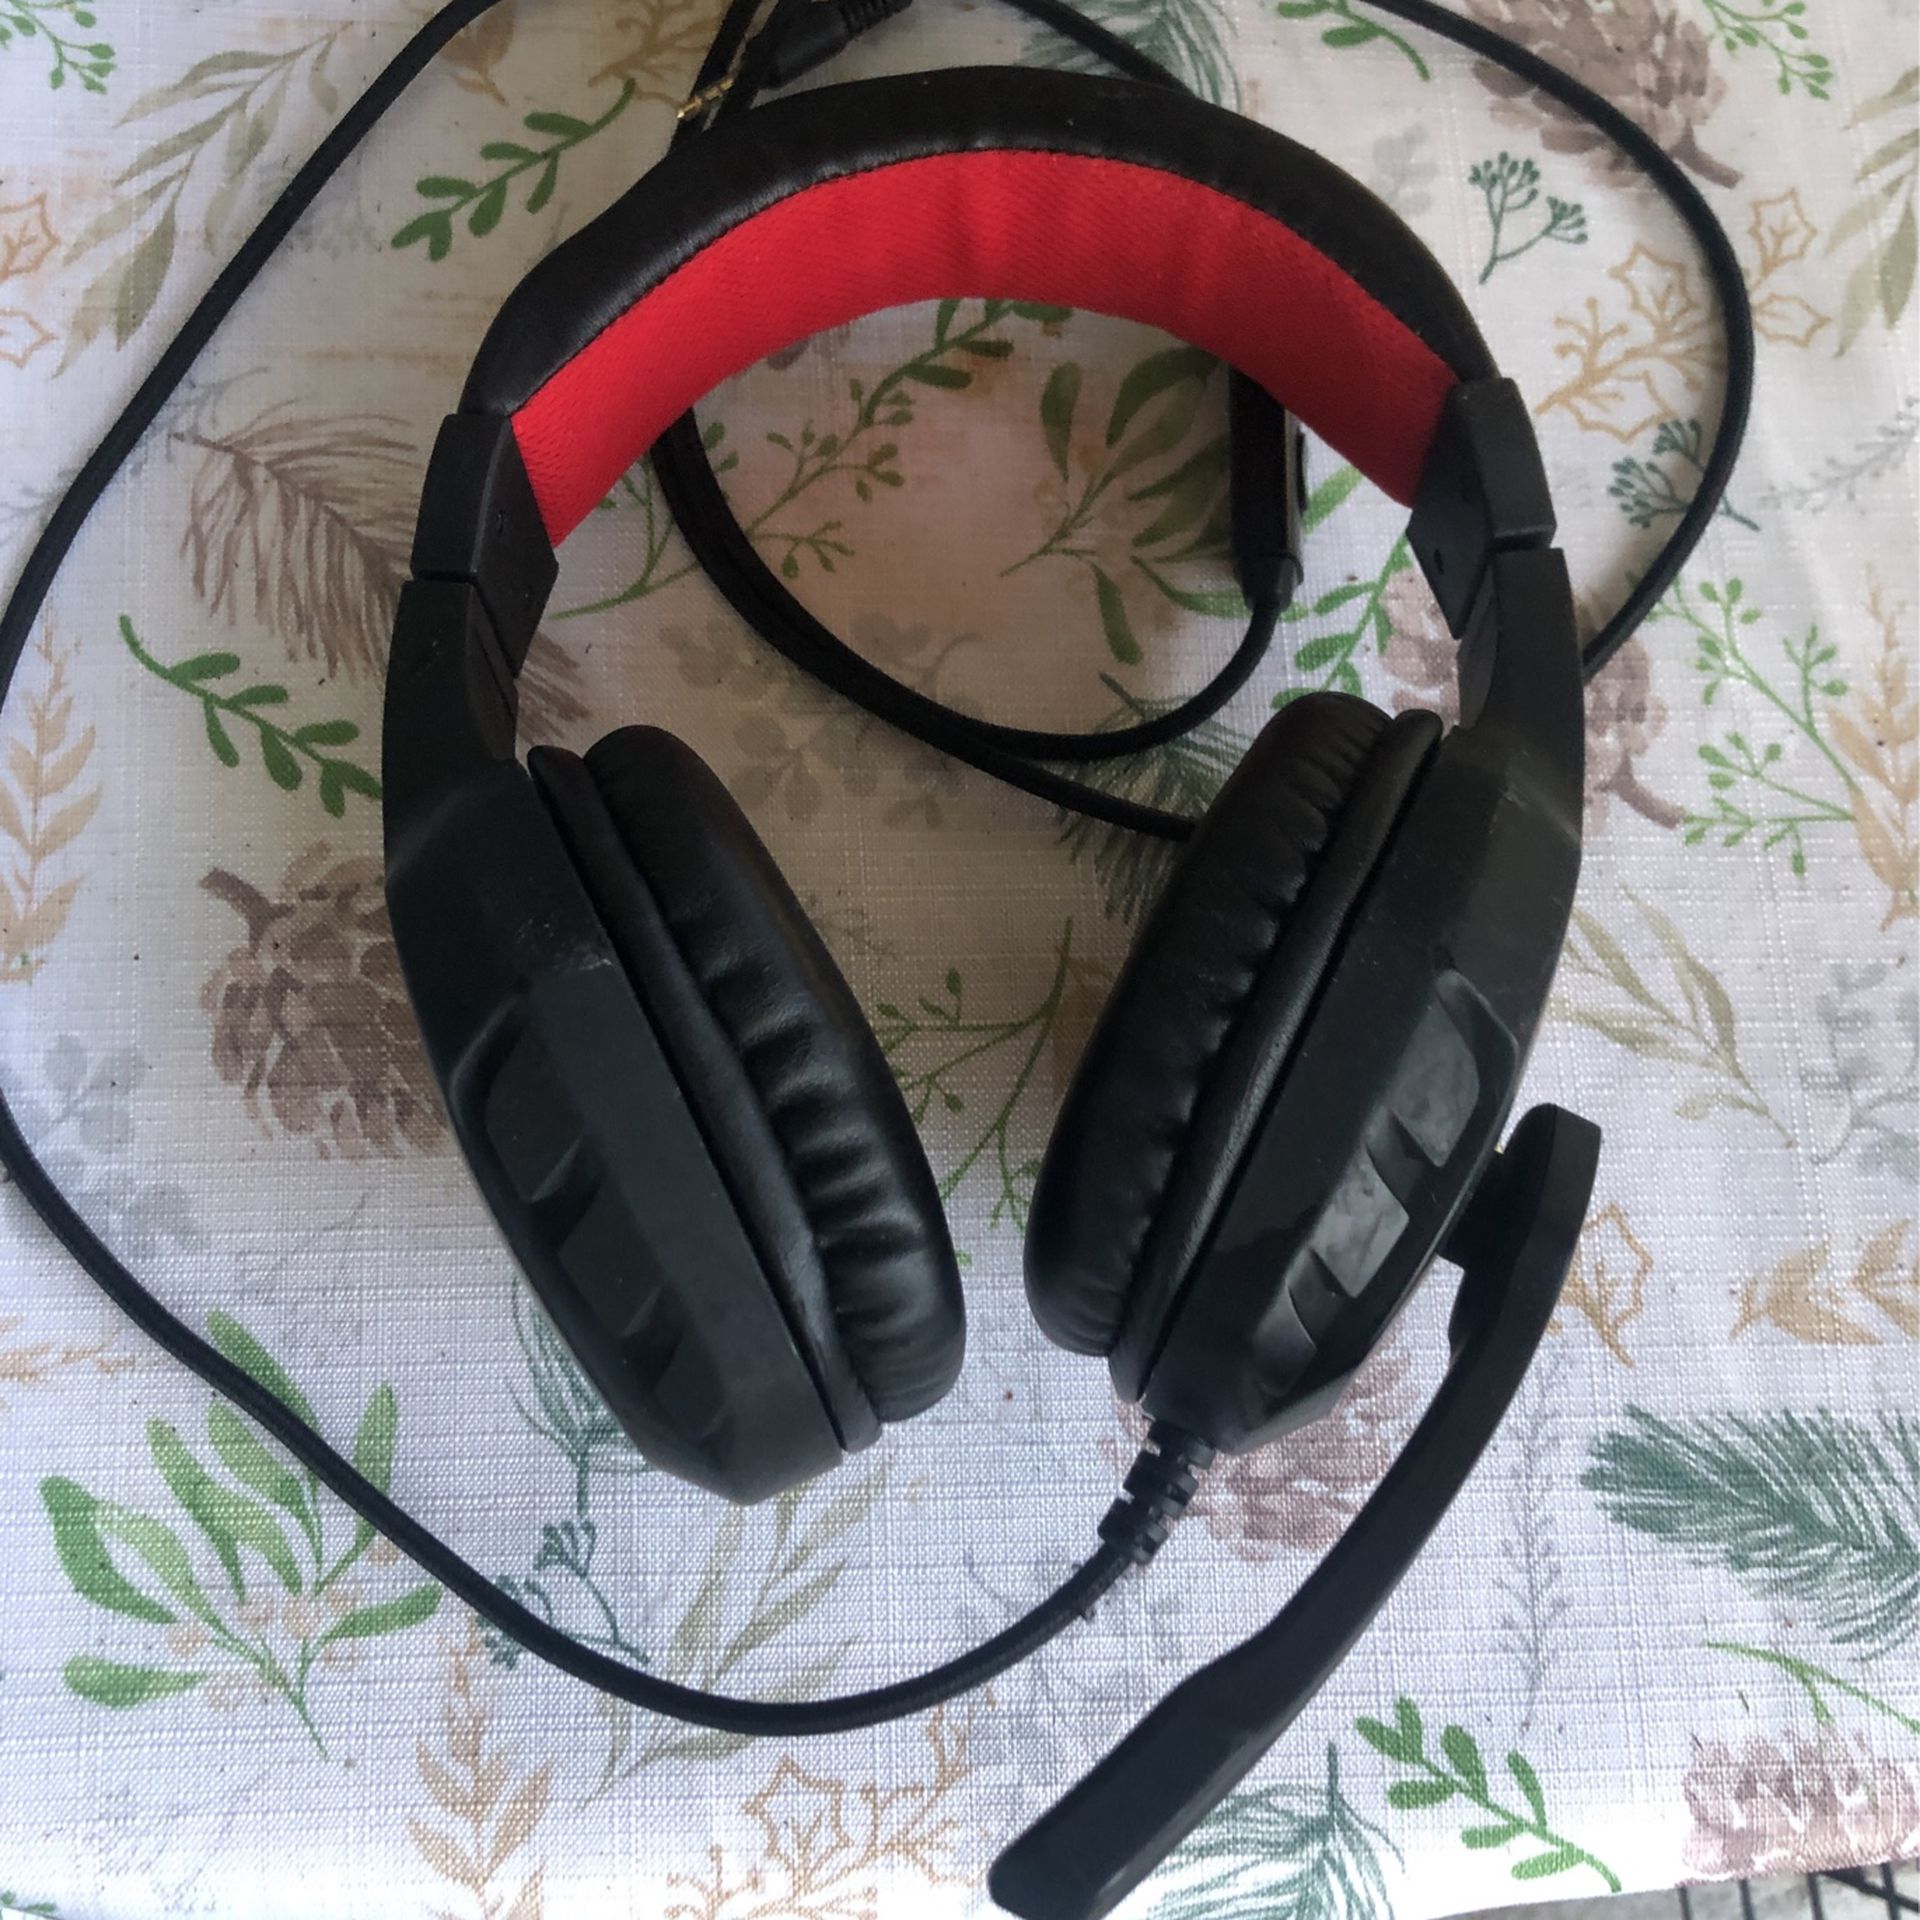 Nubwo Gameing Head Sets